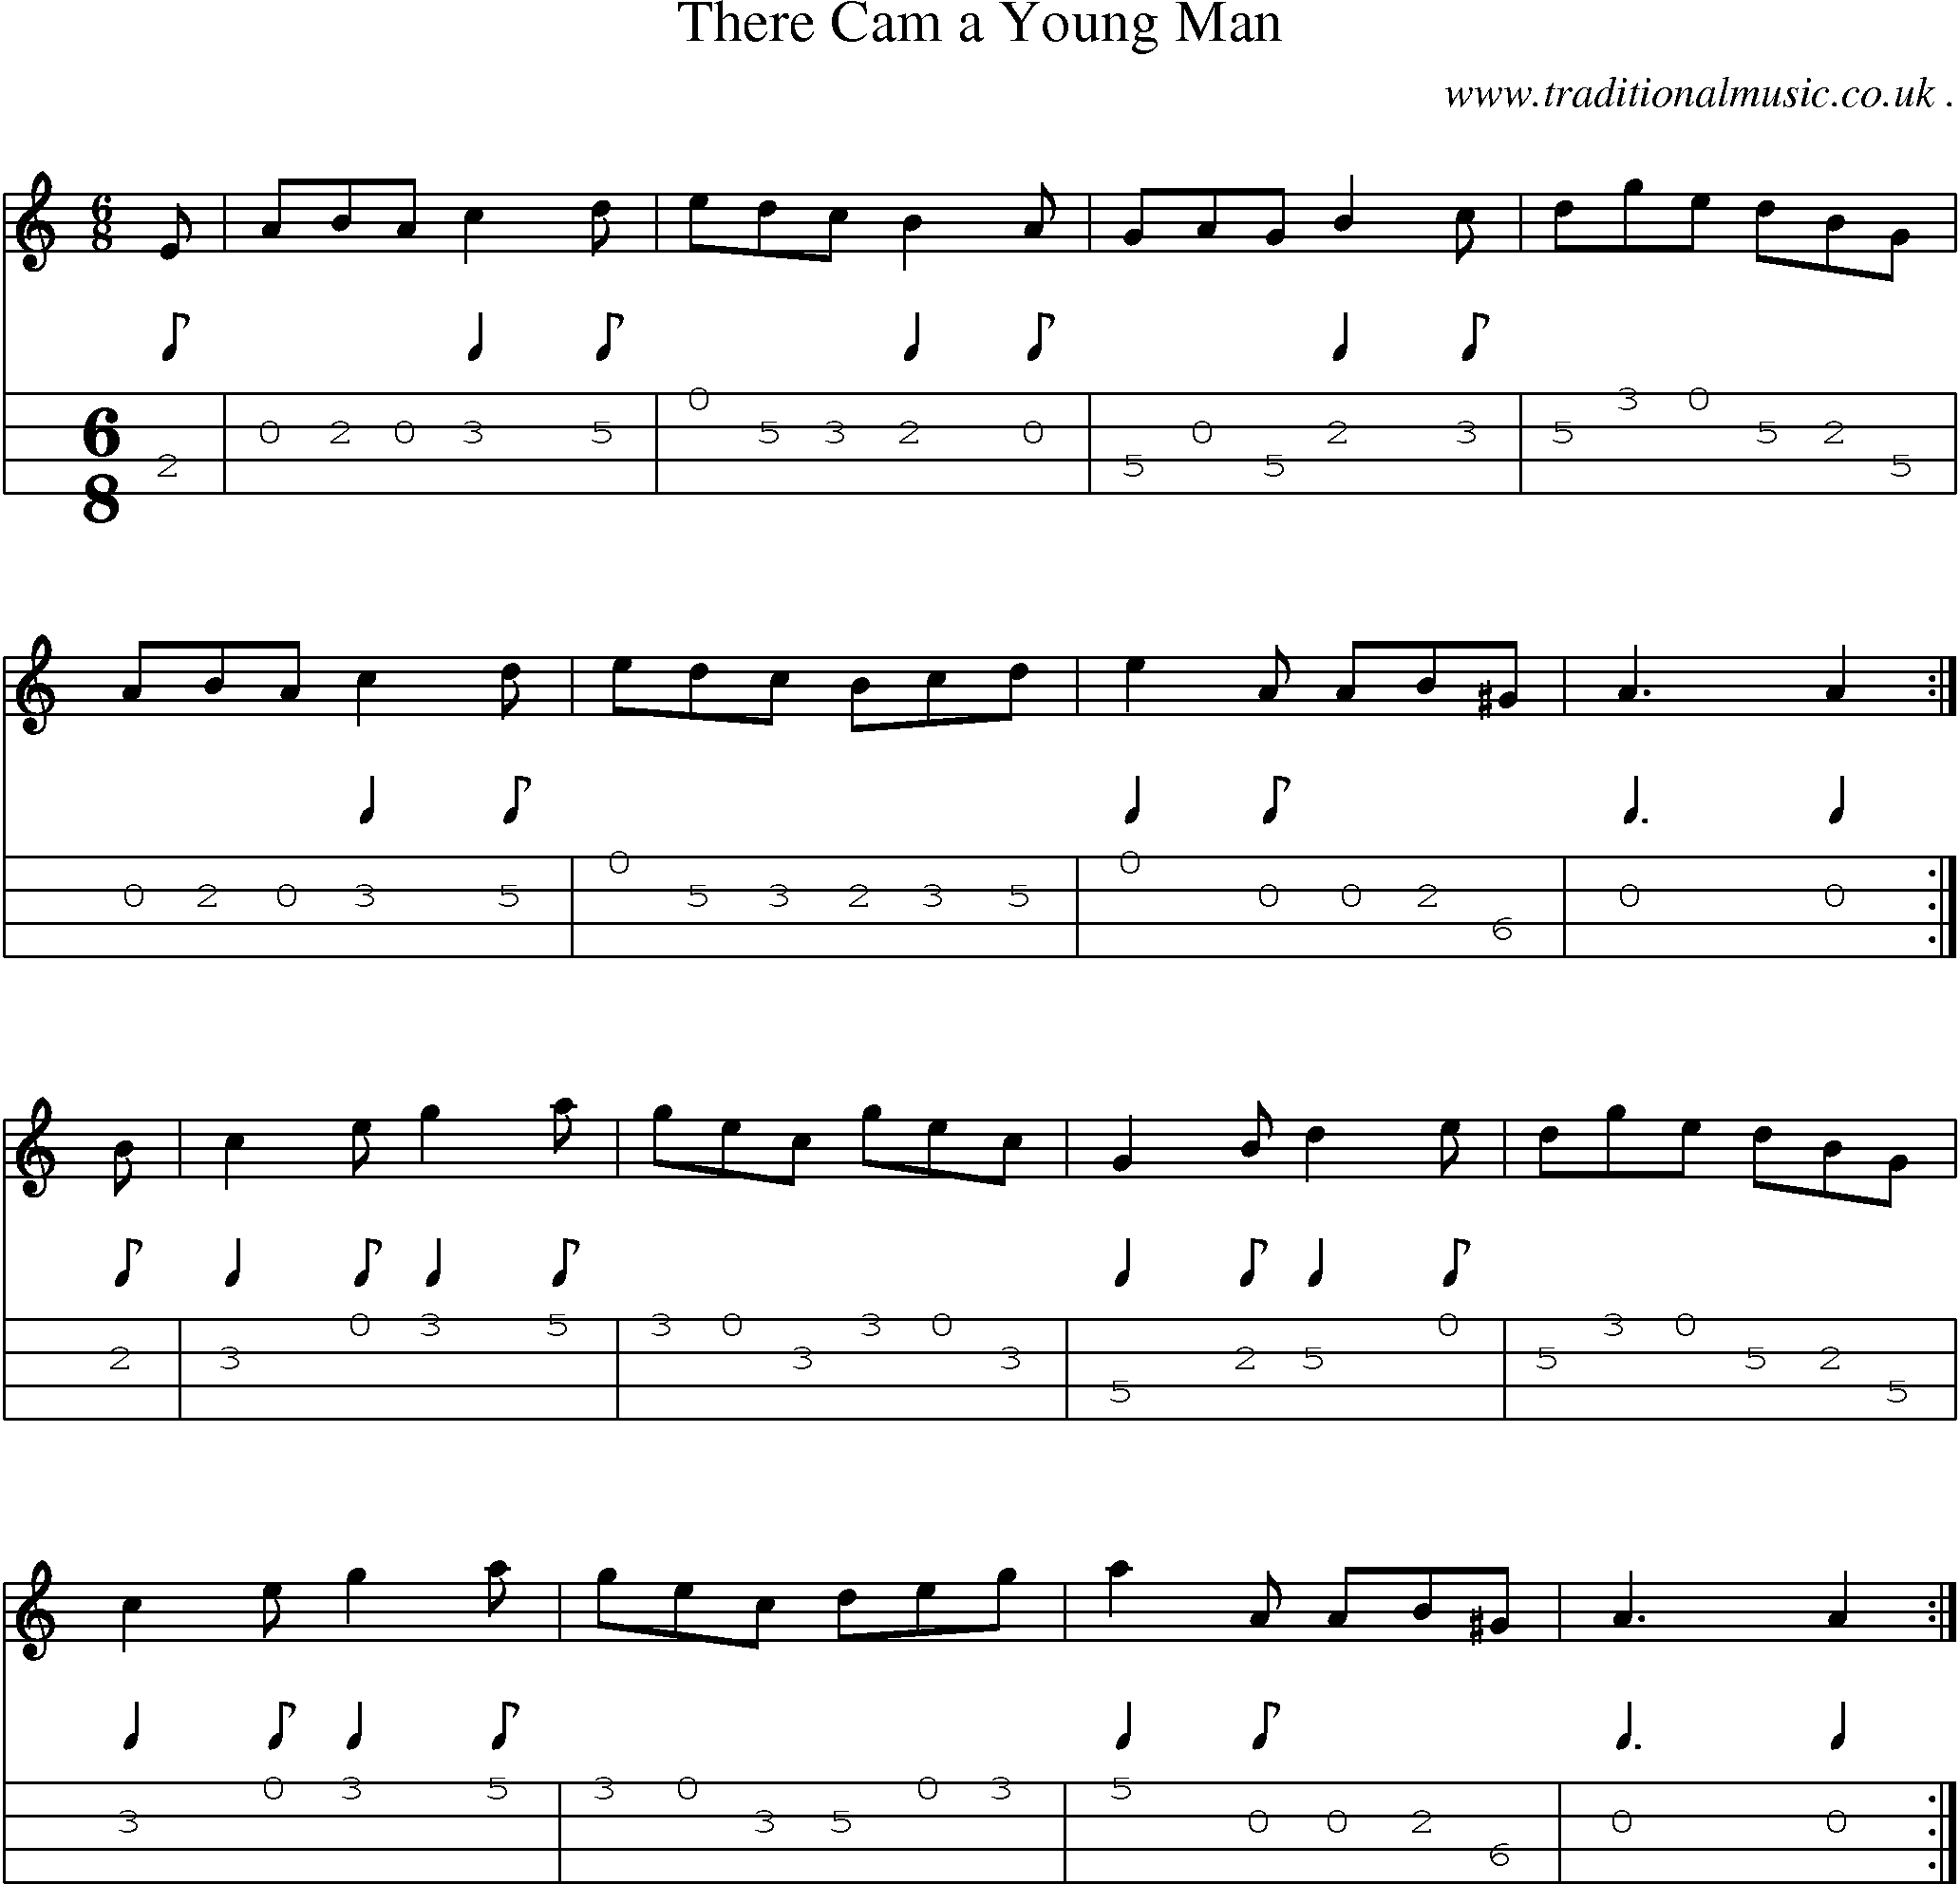 Sheet-music  score, Chords and Mandolin Tabs for There Cam A Young Man